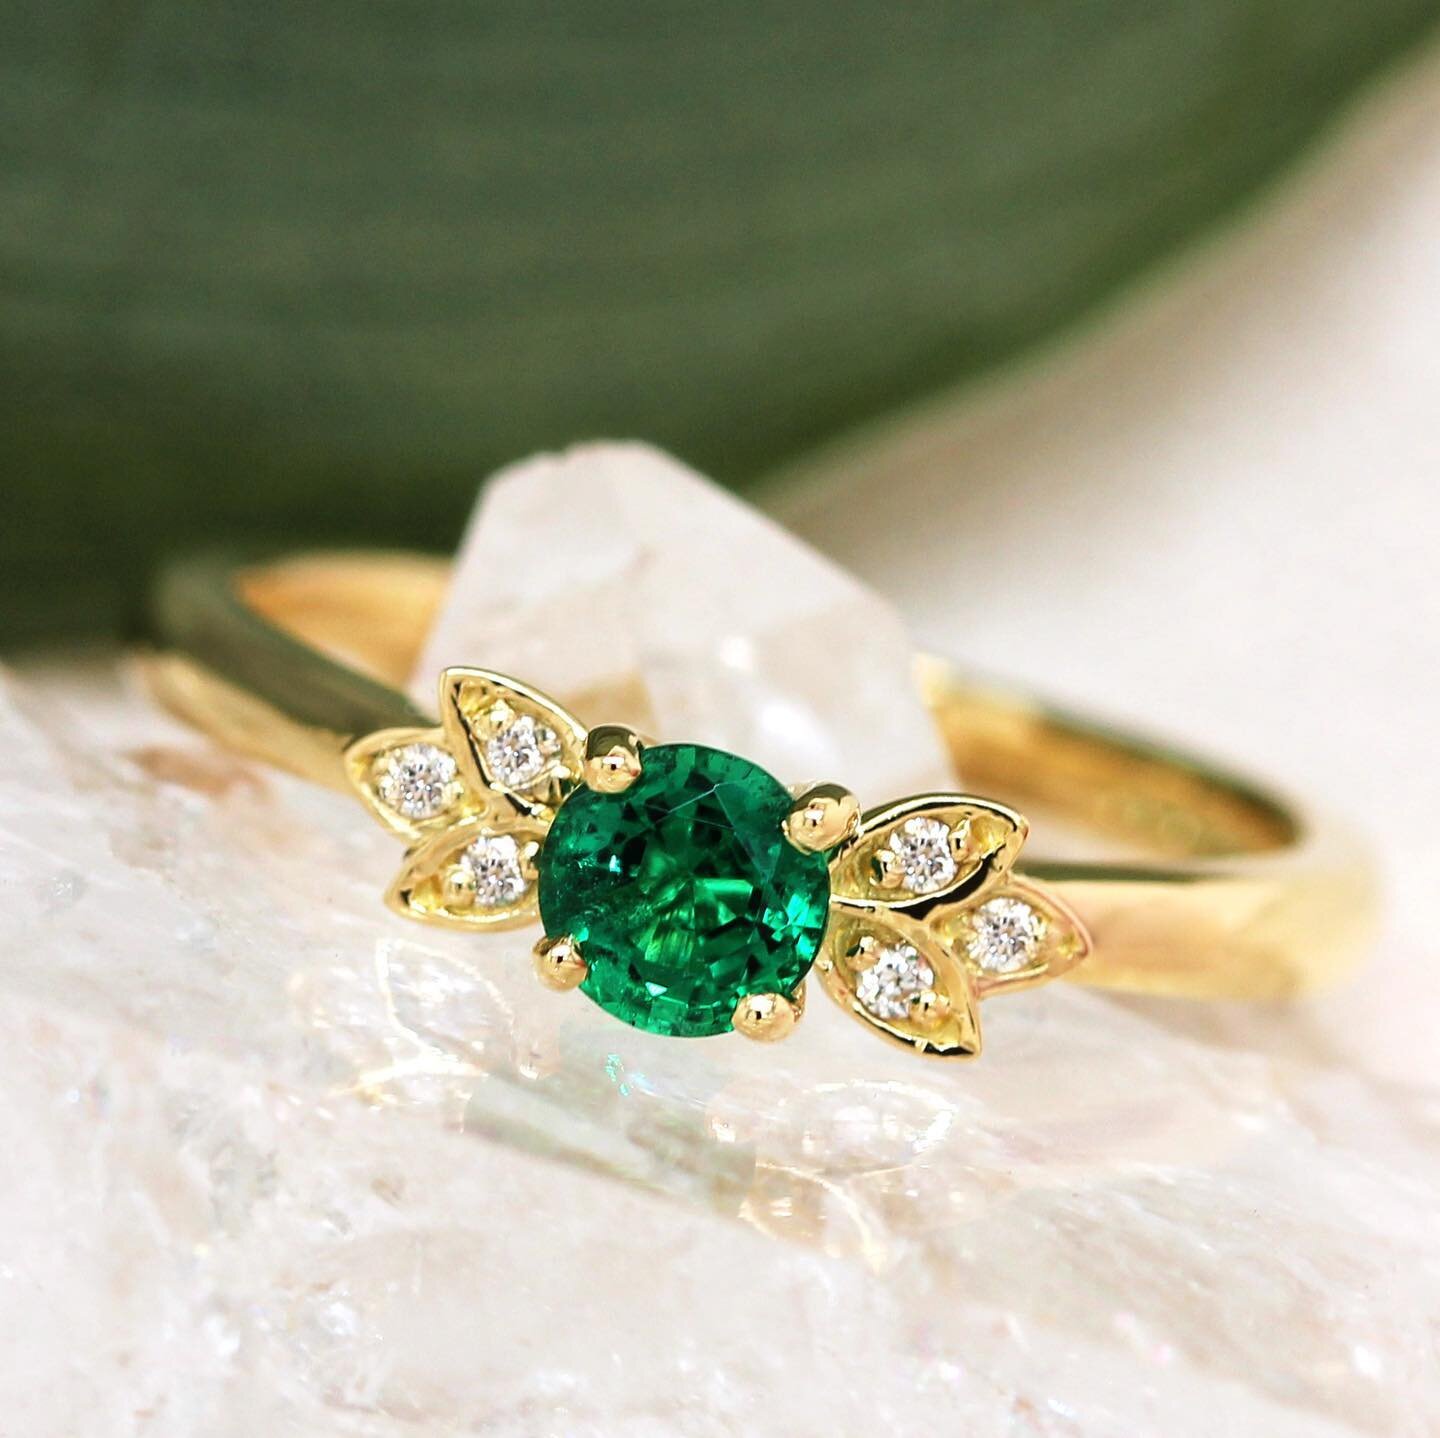 The distinctive, nature inspired look of marganita is a great choice for someone looking for a one of a kind design. 
.
.
.
#engagementring #emerald #emeraldengagementring #yellowgoldengagementring #bespoke #ringoftheday #diamondring #diamondengageme